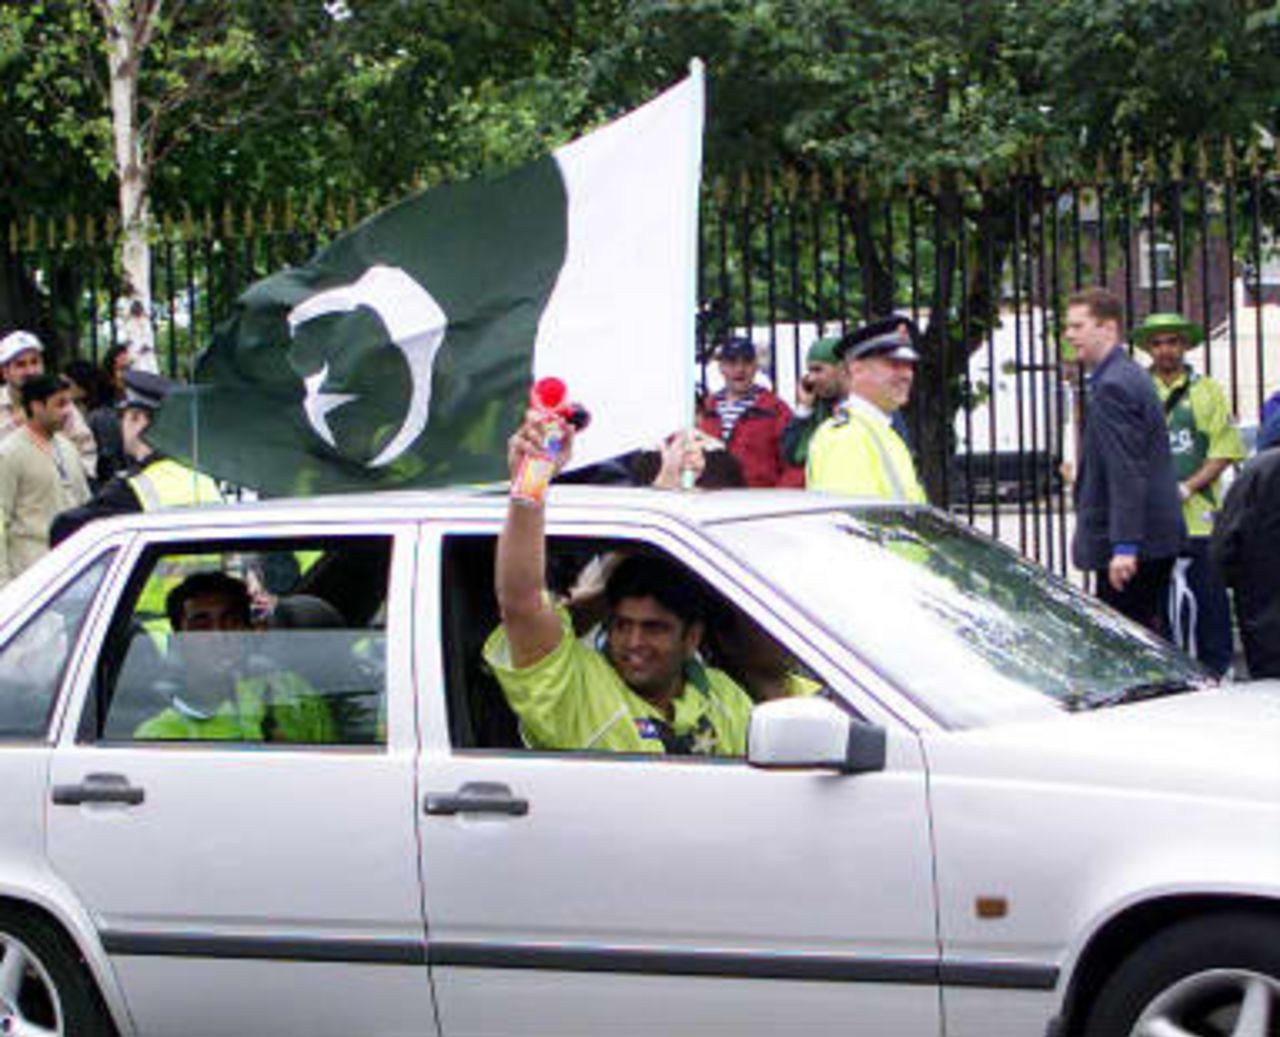 Enthusiastic Pakistan fans wave flags as they drive past Indian supporters 08 June 1999, before the Cricket World Cup match Pakistan vs India at Old Trafford, in Manchester